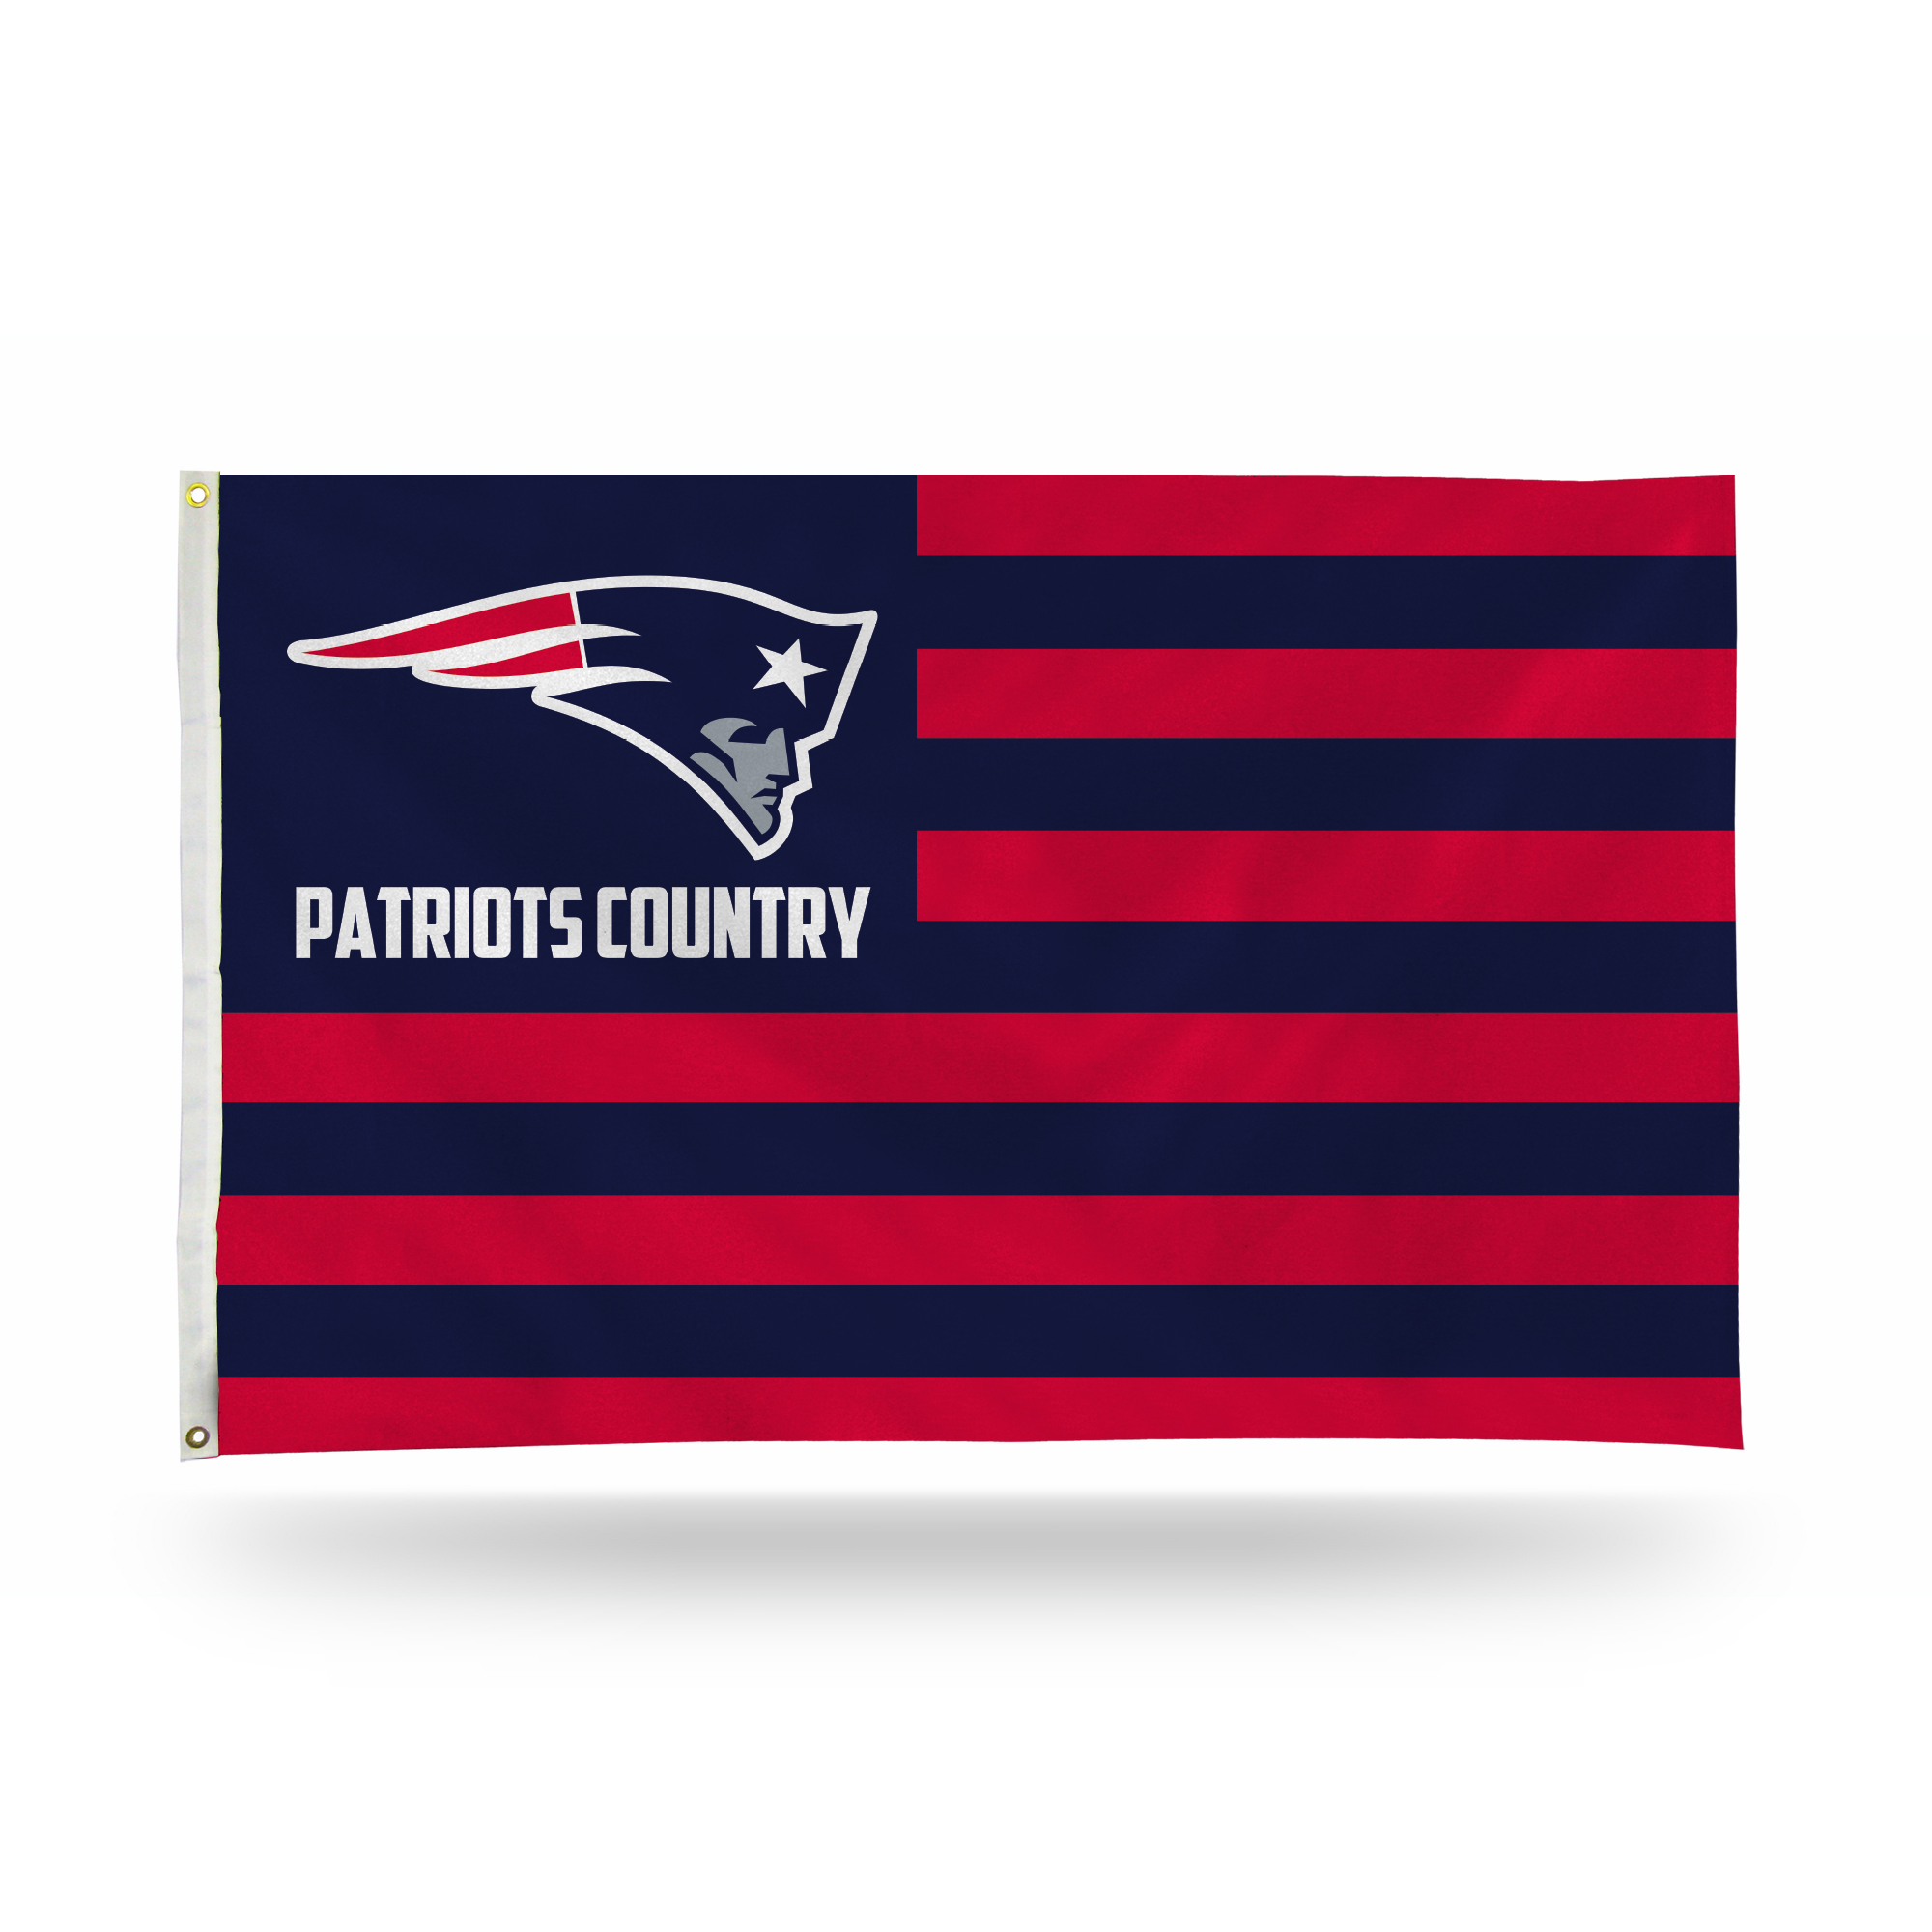 Rico Industries NFL Football New England Patriots Country 3' x 5' Banner Flag